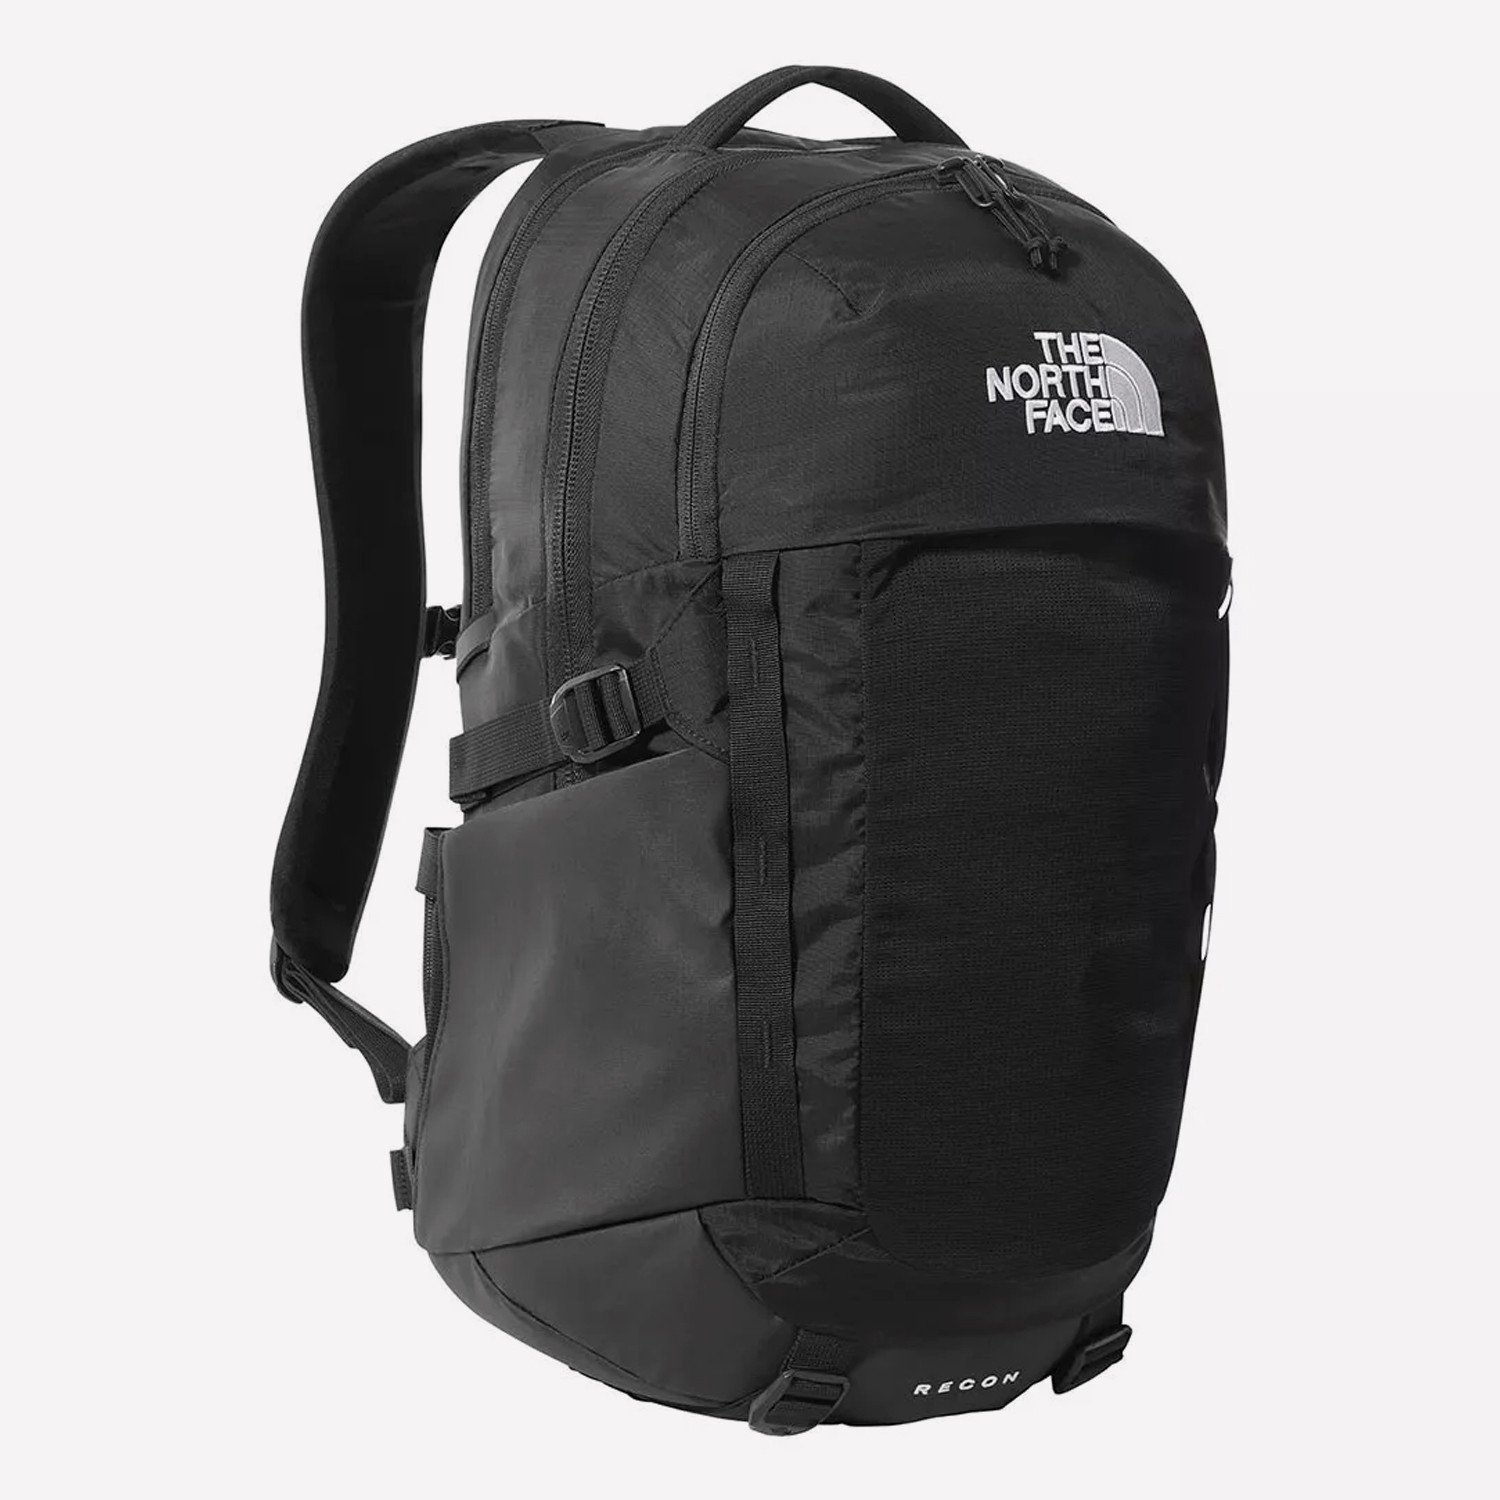 The North Face Recon Unisex Σακίδιο Πλάτης 30L (9000085646_23281)